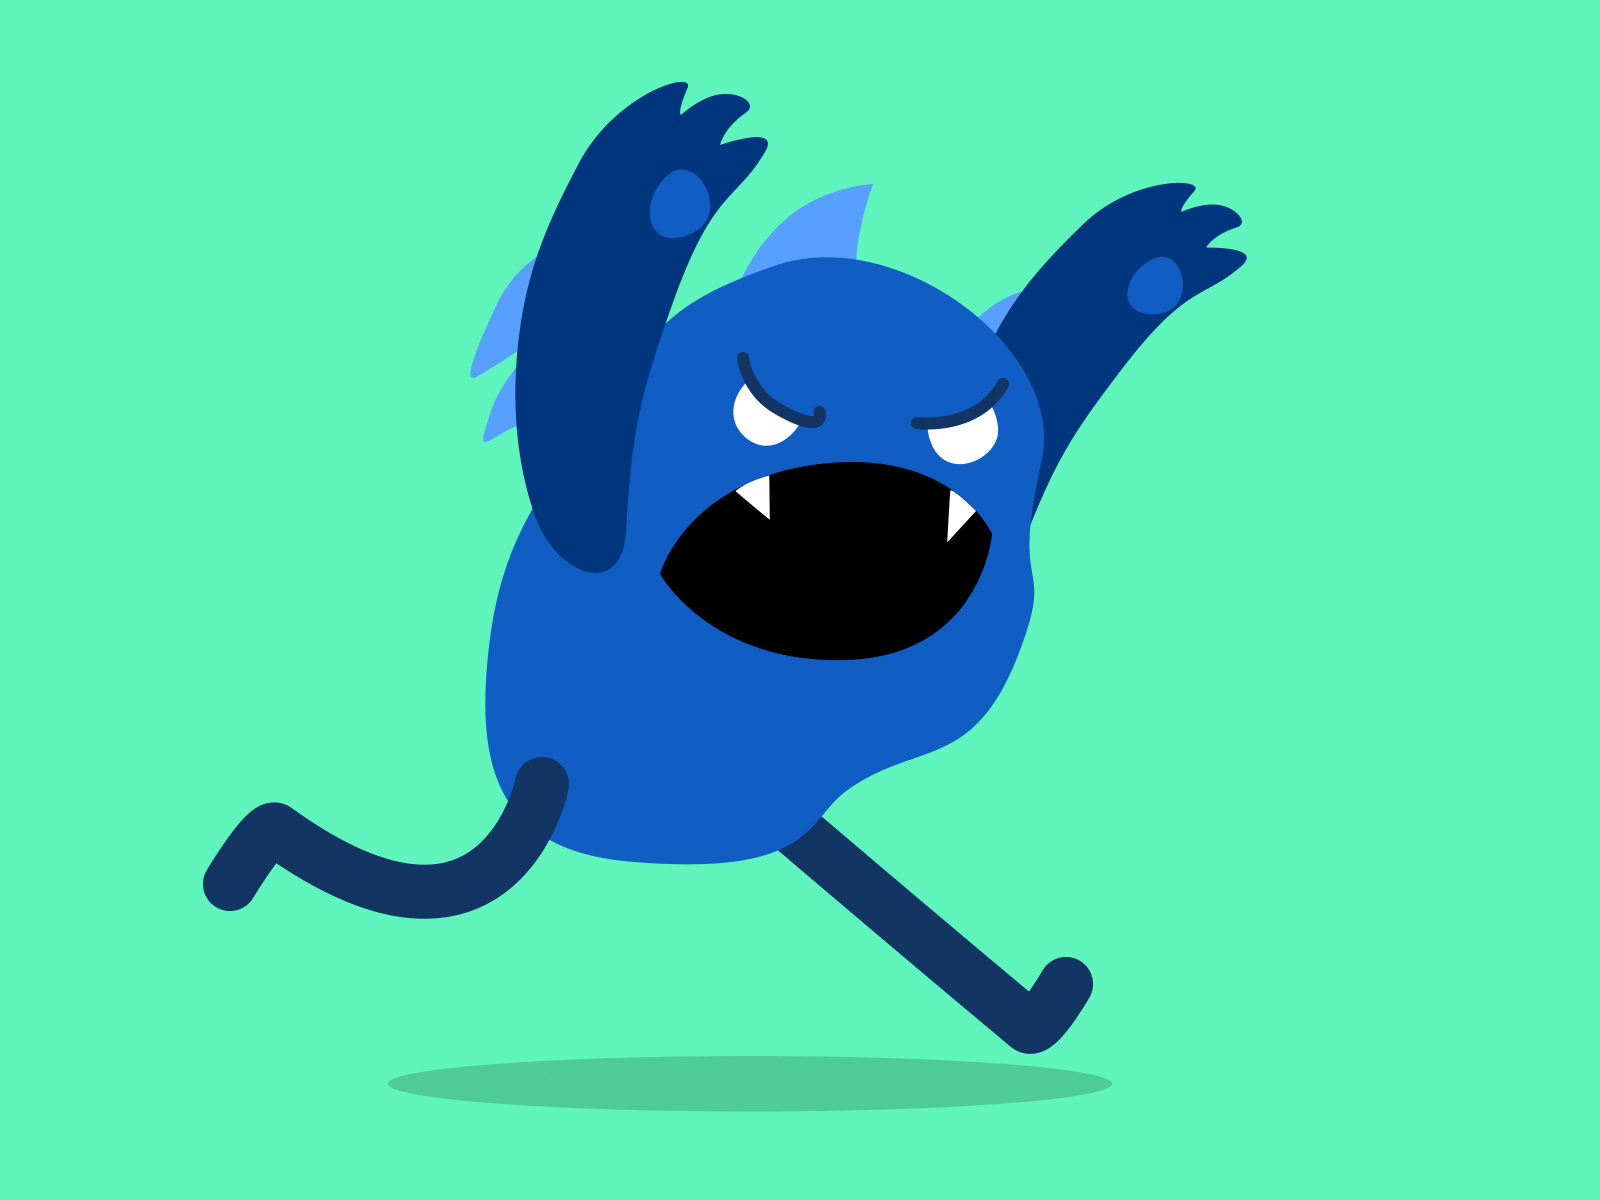 Running 2d aftereffects character illustration